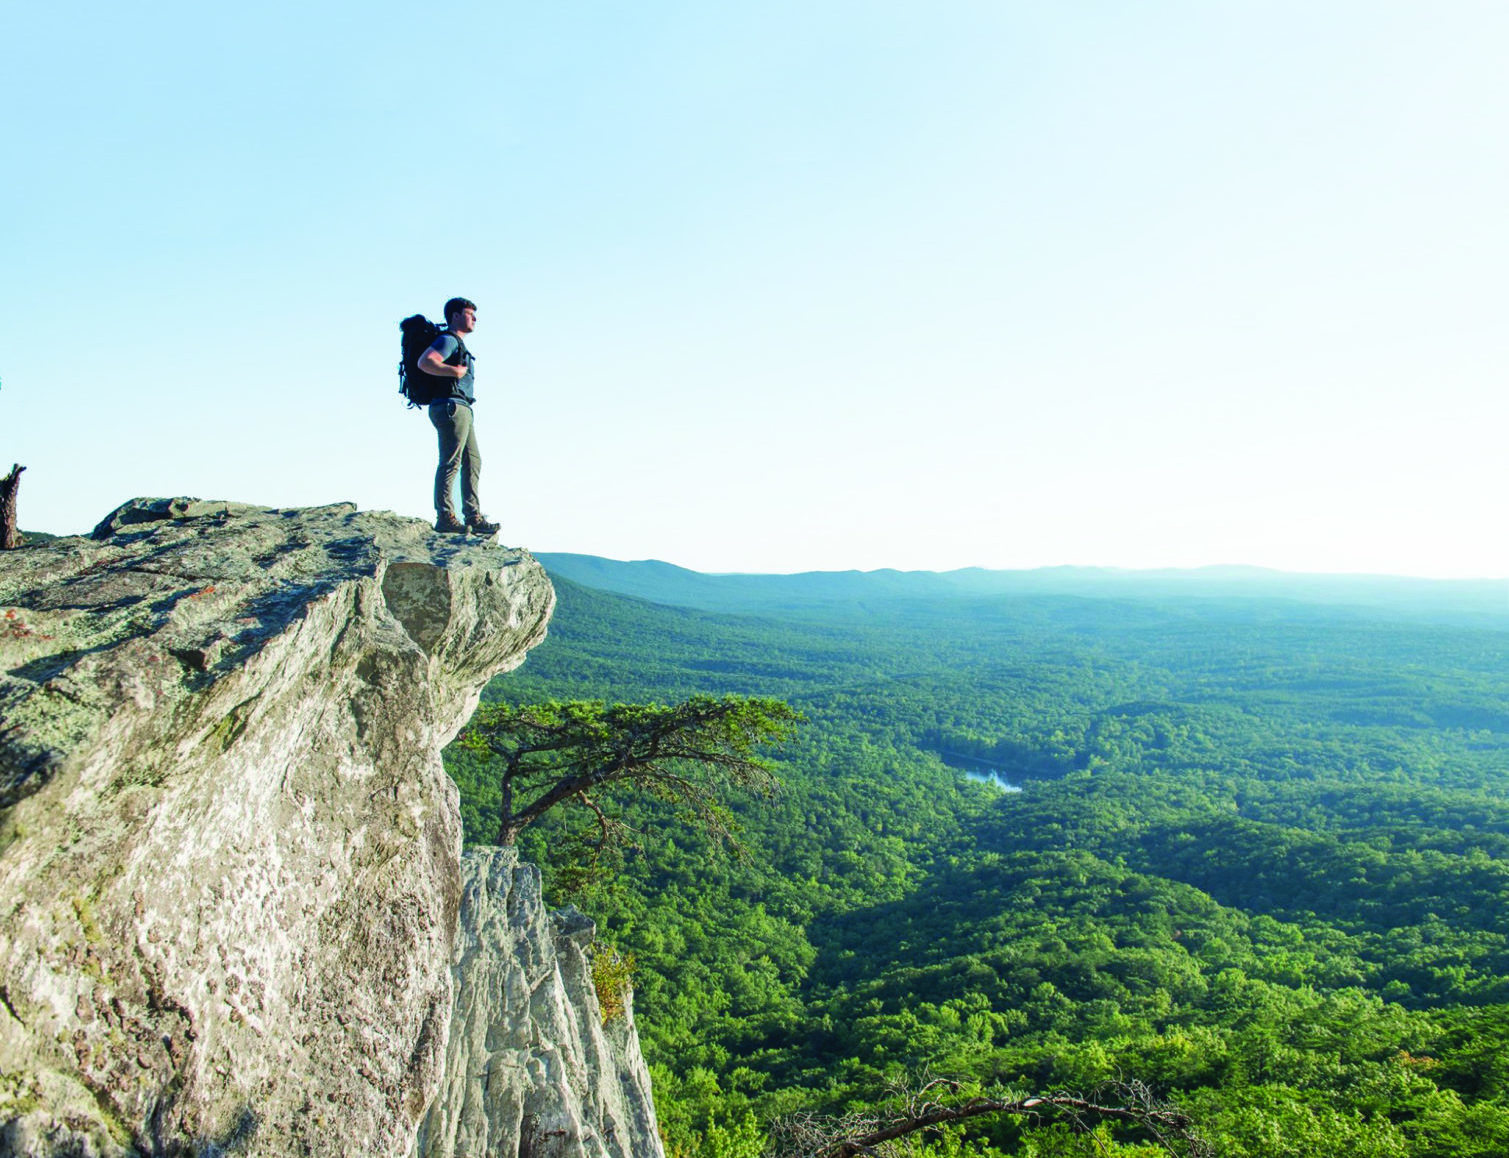 The view from Pulpit Rock at Cheaha State Park.